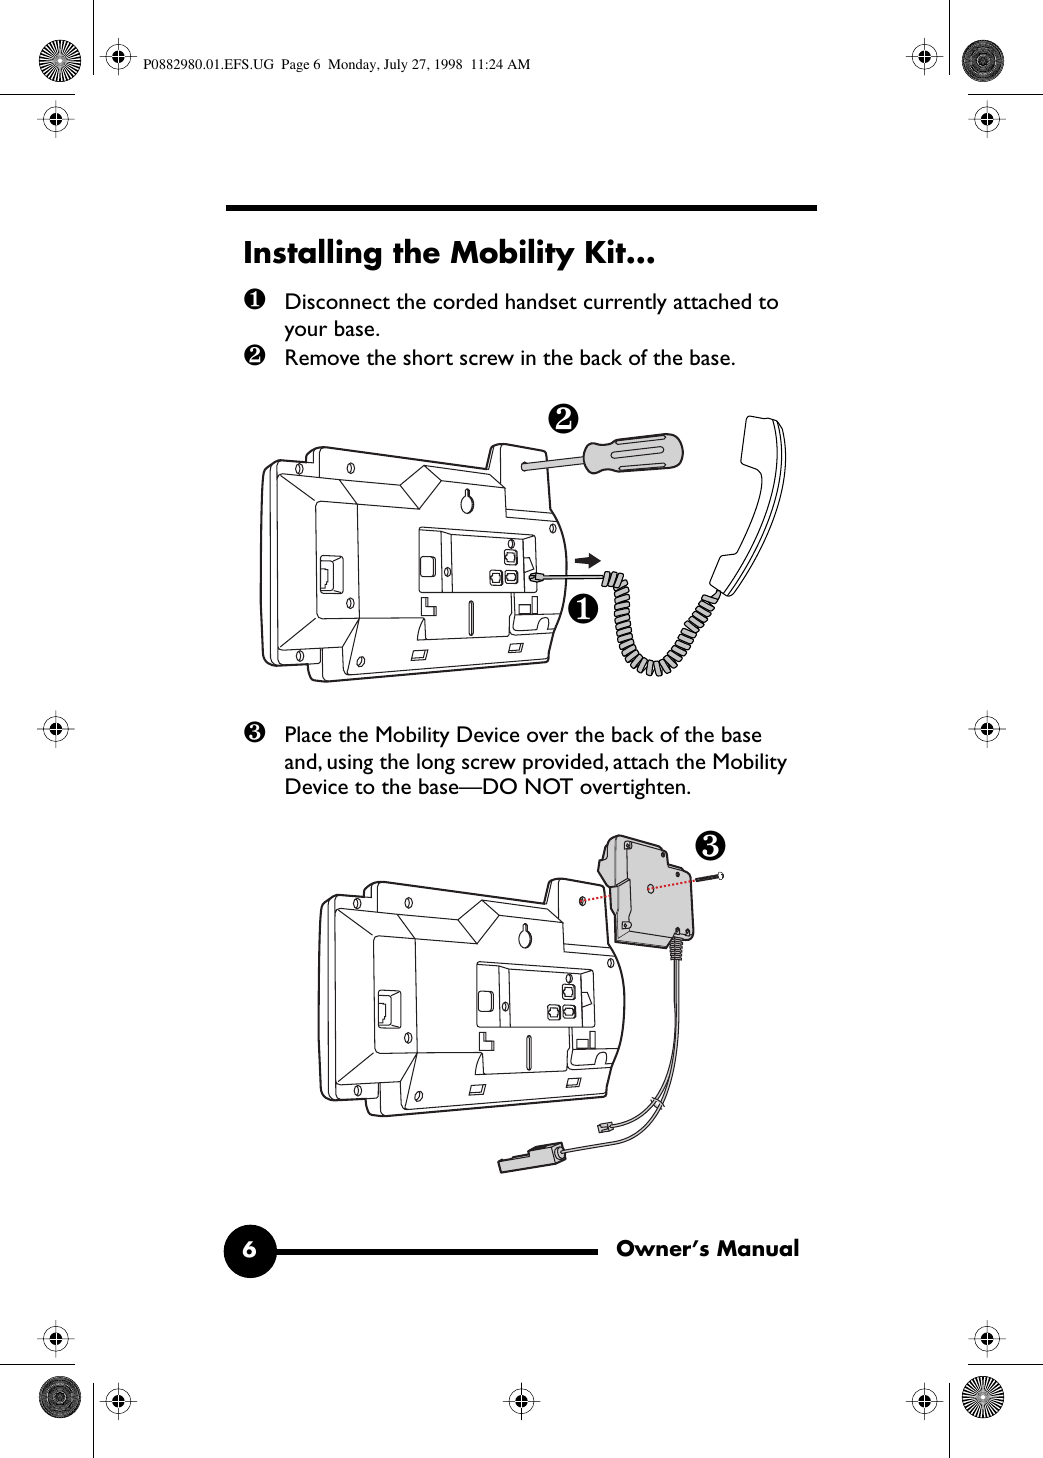  Owner’s Manual6 Installing the Mobility Kit... ❶ Disconnect the corded handset currently attached to your base. ❷ Remove the short screw in the back of the base. ❸ Place the Mobility Device over the back of the base and, using the long screw provided, attach the Mobility Device to the base—DO NOT overtighten. ❶❷❸ P0882980.01.EFS.UG  Page 6  Monday, July 27, 1998  11:24 AM